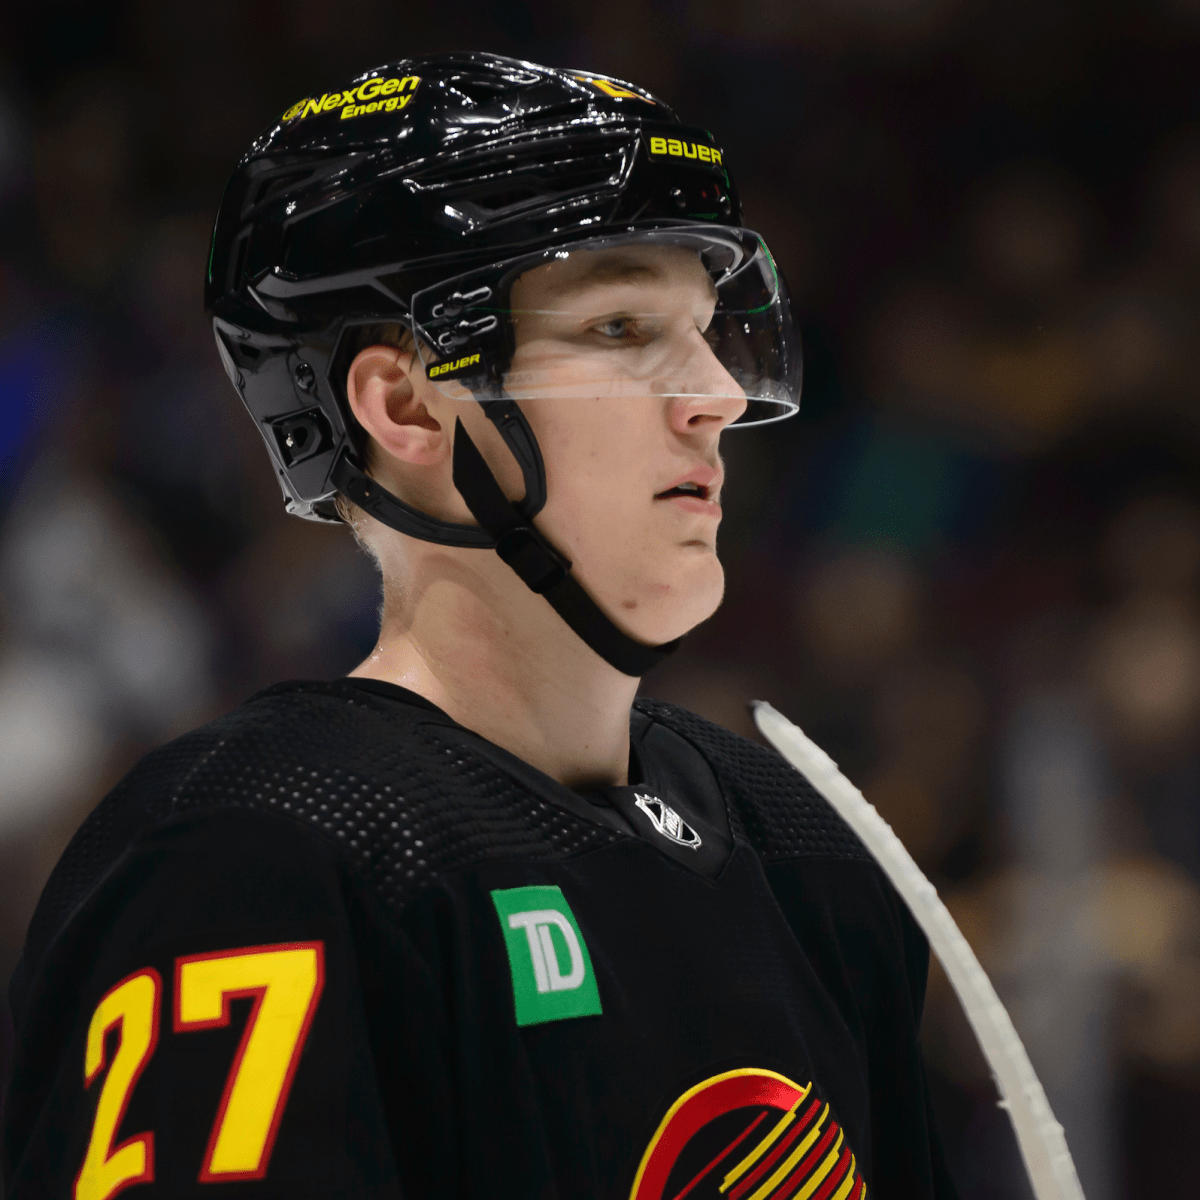 Bowman, Maillet, Saganiuk, and Wakely — Who are the Canucks Young